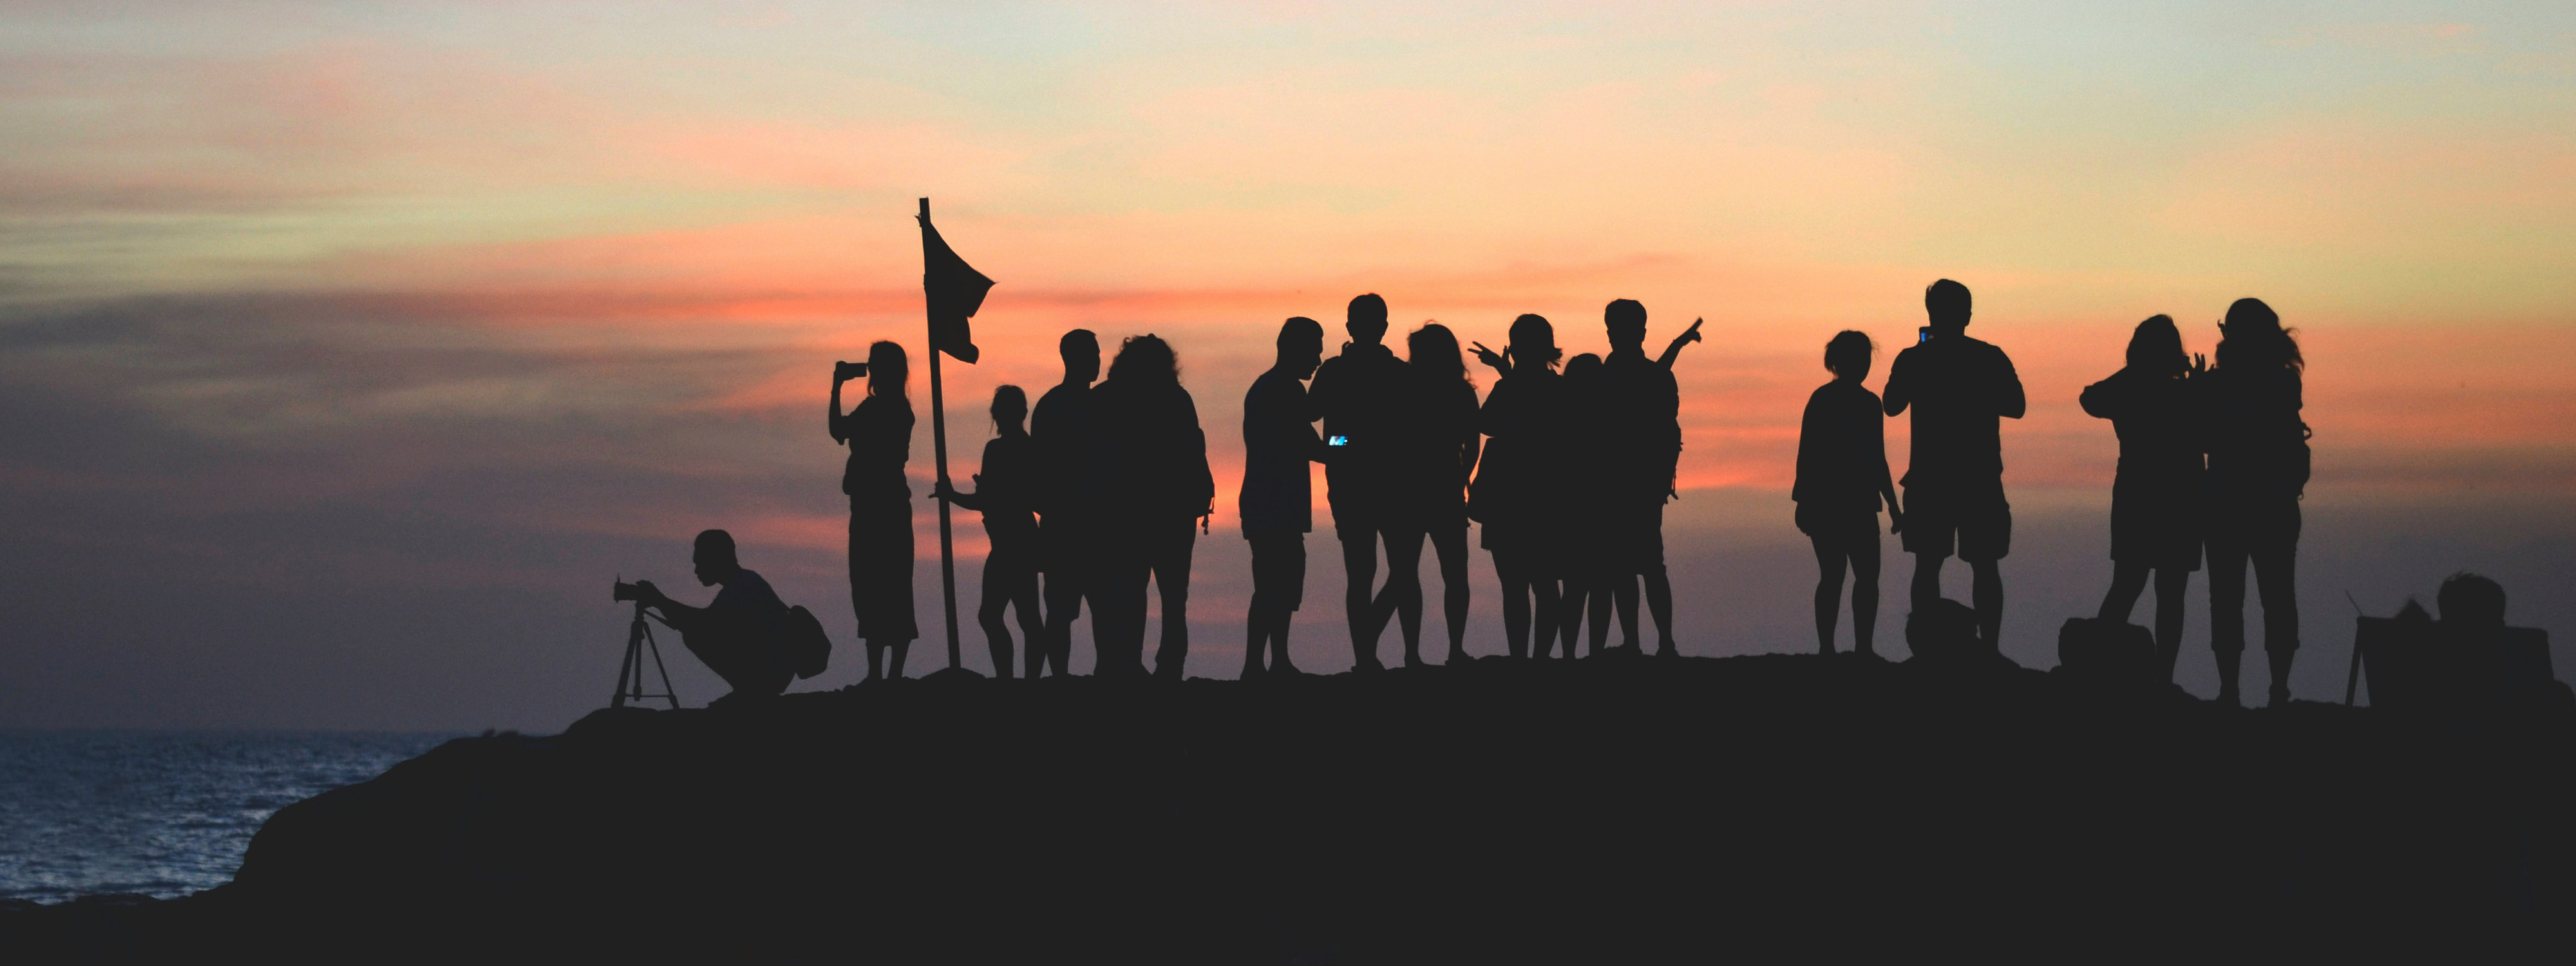 A team group of people at the beach at sunset